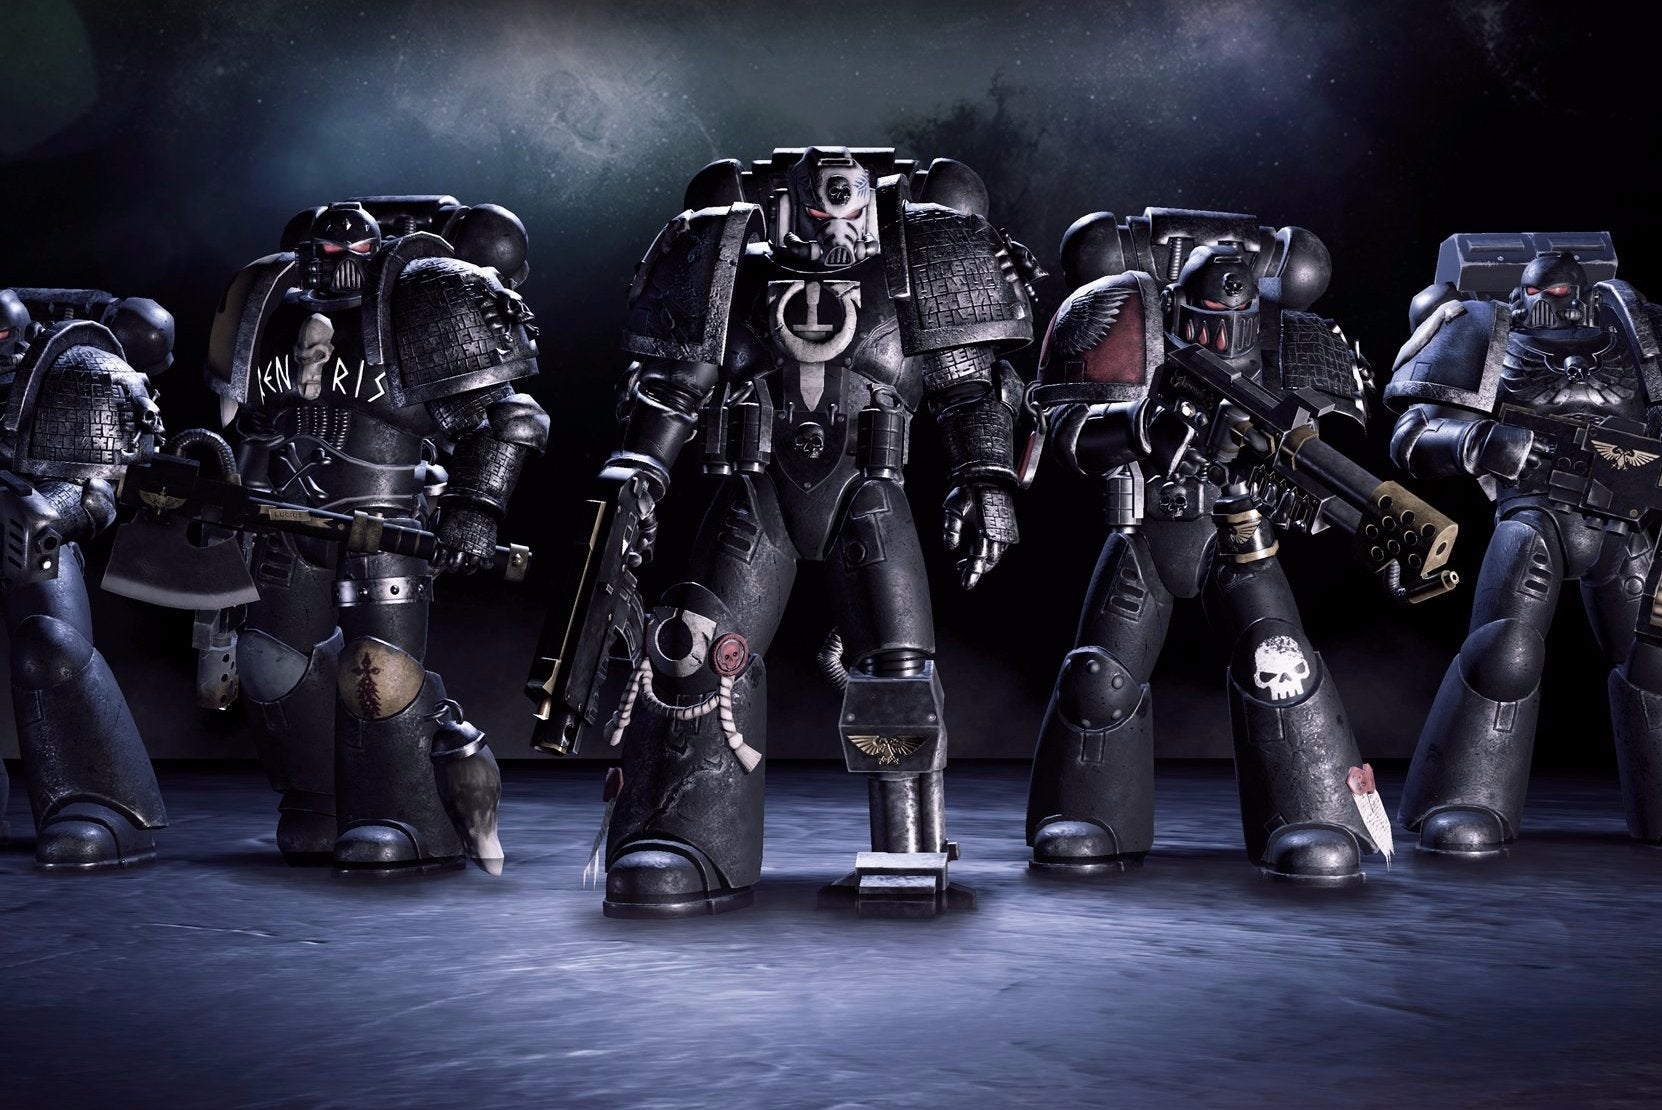 Image for Warhammer 40K Deathwatch to get asynchronous "play by mail" multiplayer mode